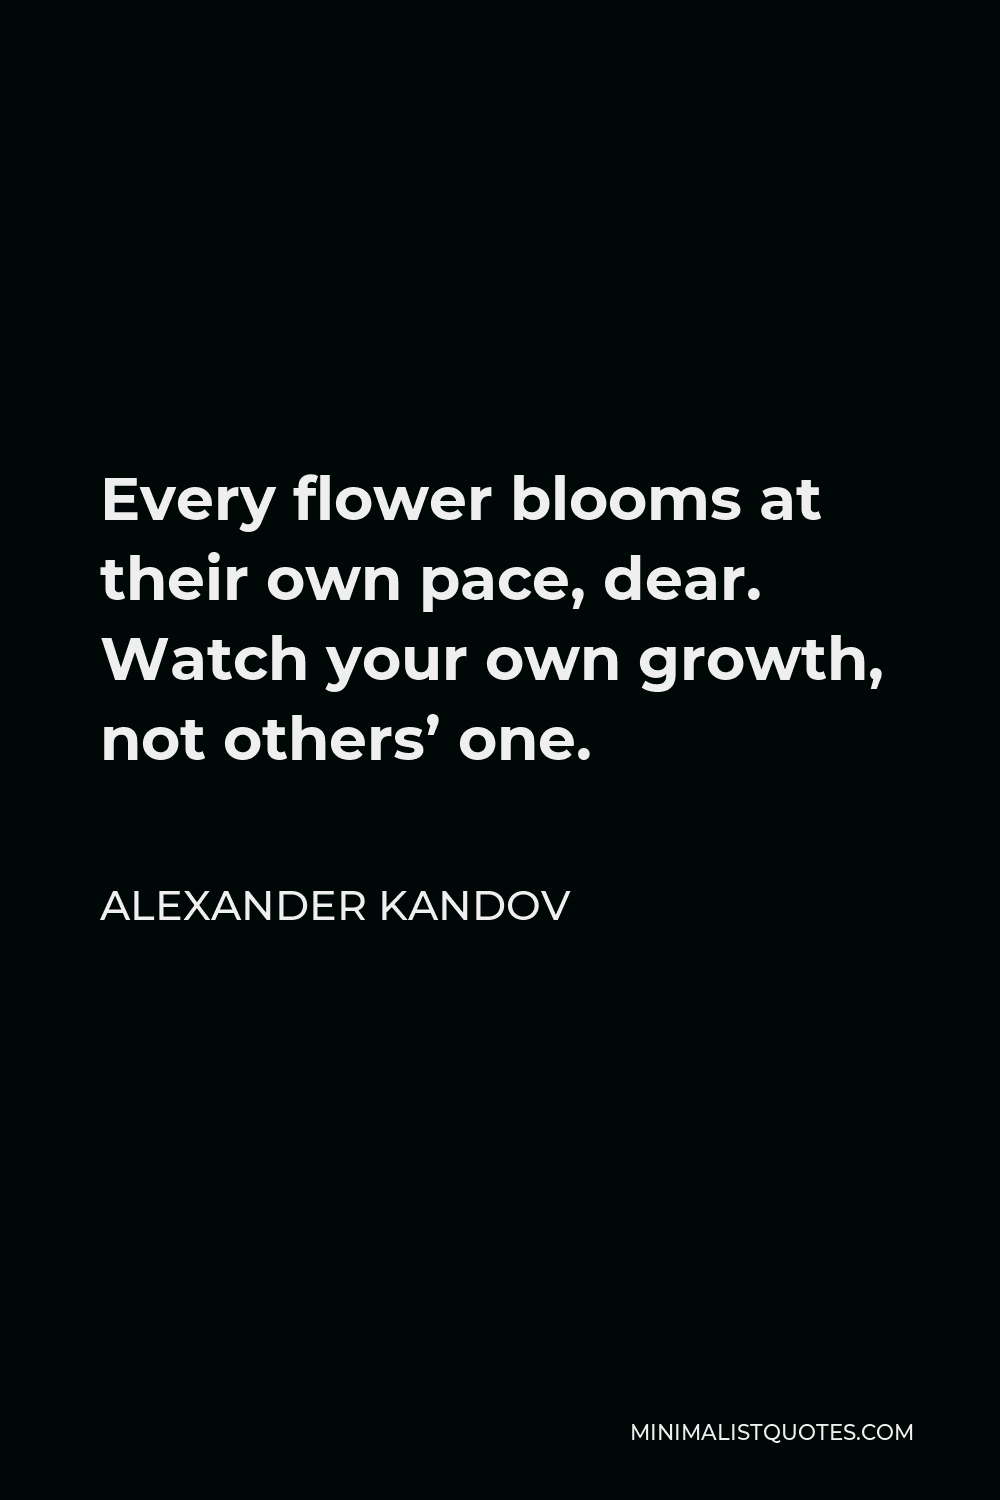 Alexander Kandov Quote - Every flower blooms at their own pace, dear. Watch your own growth, not others’ one.